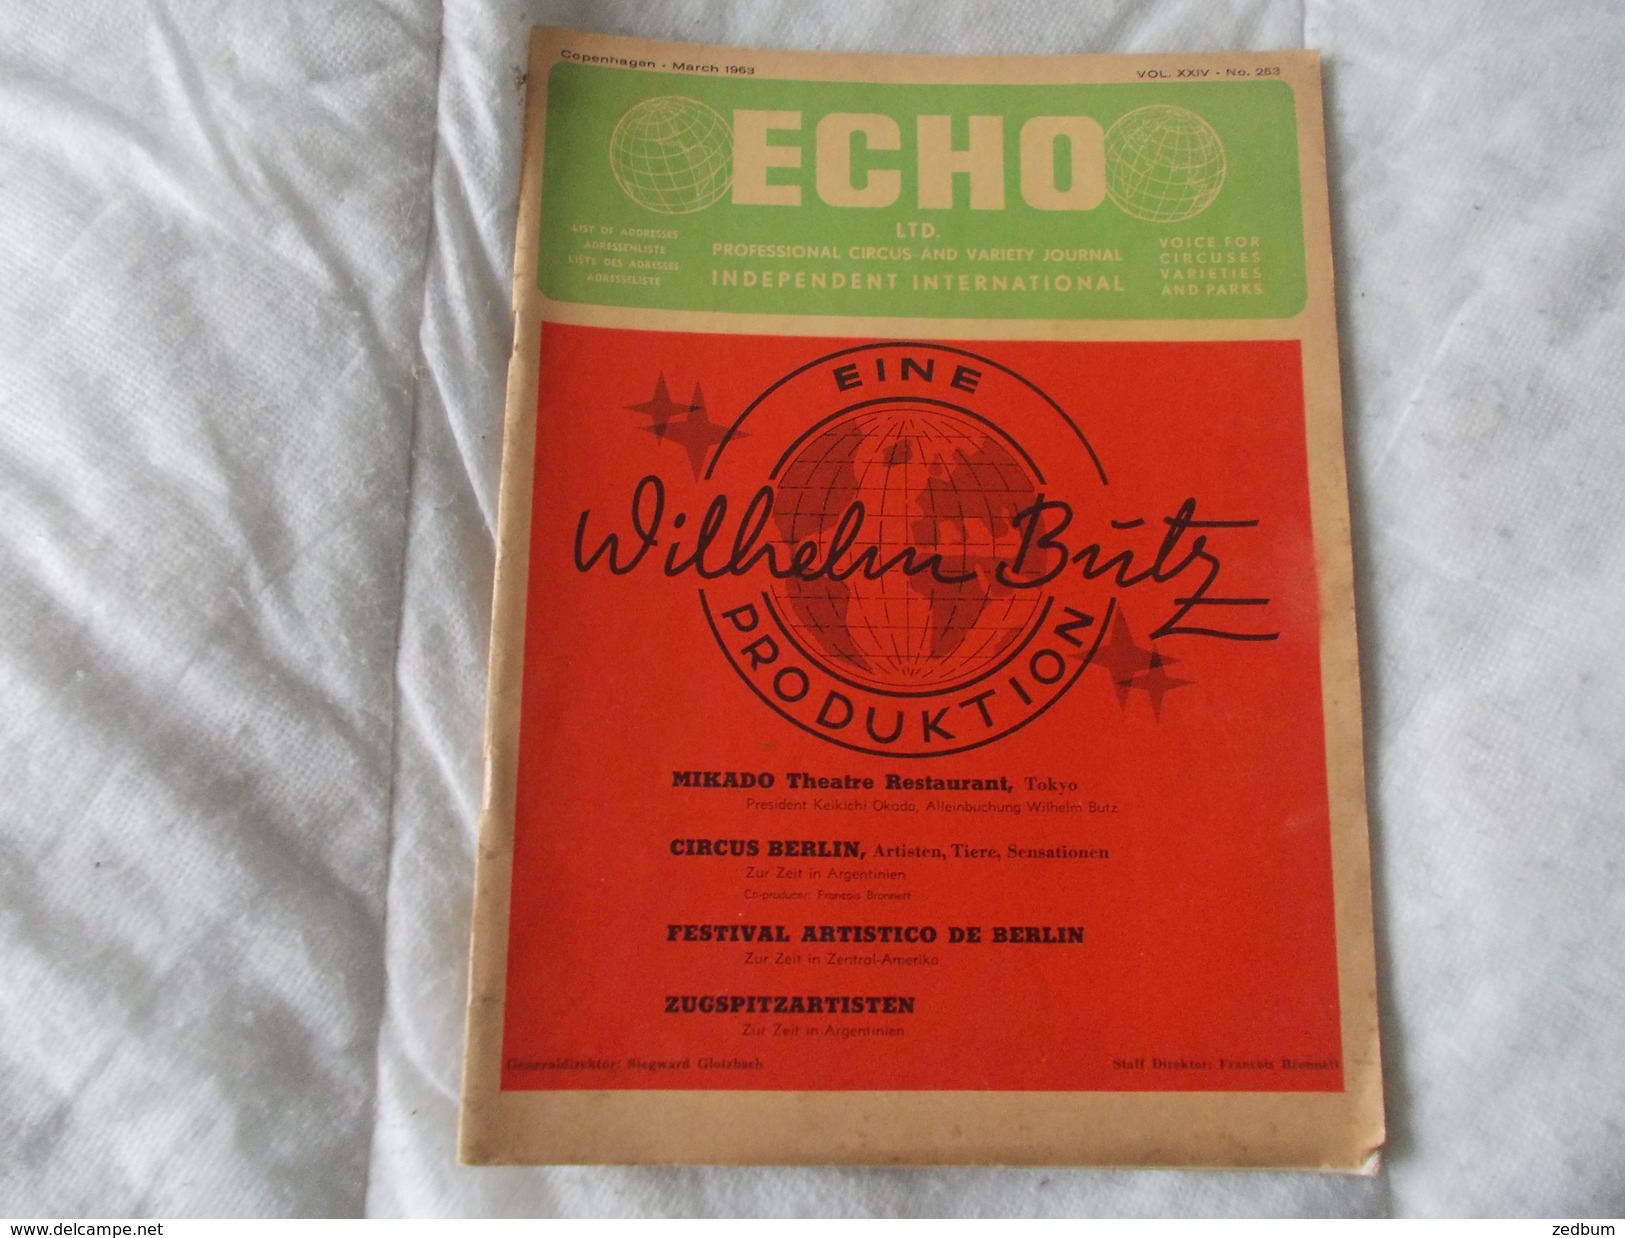 ECHO LTD Professional Circus And Variety Journal Independent International N° 253 March 1963 - Amusement